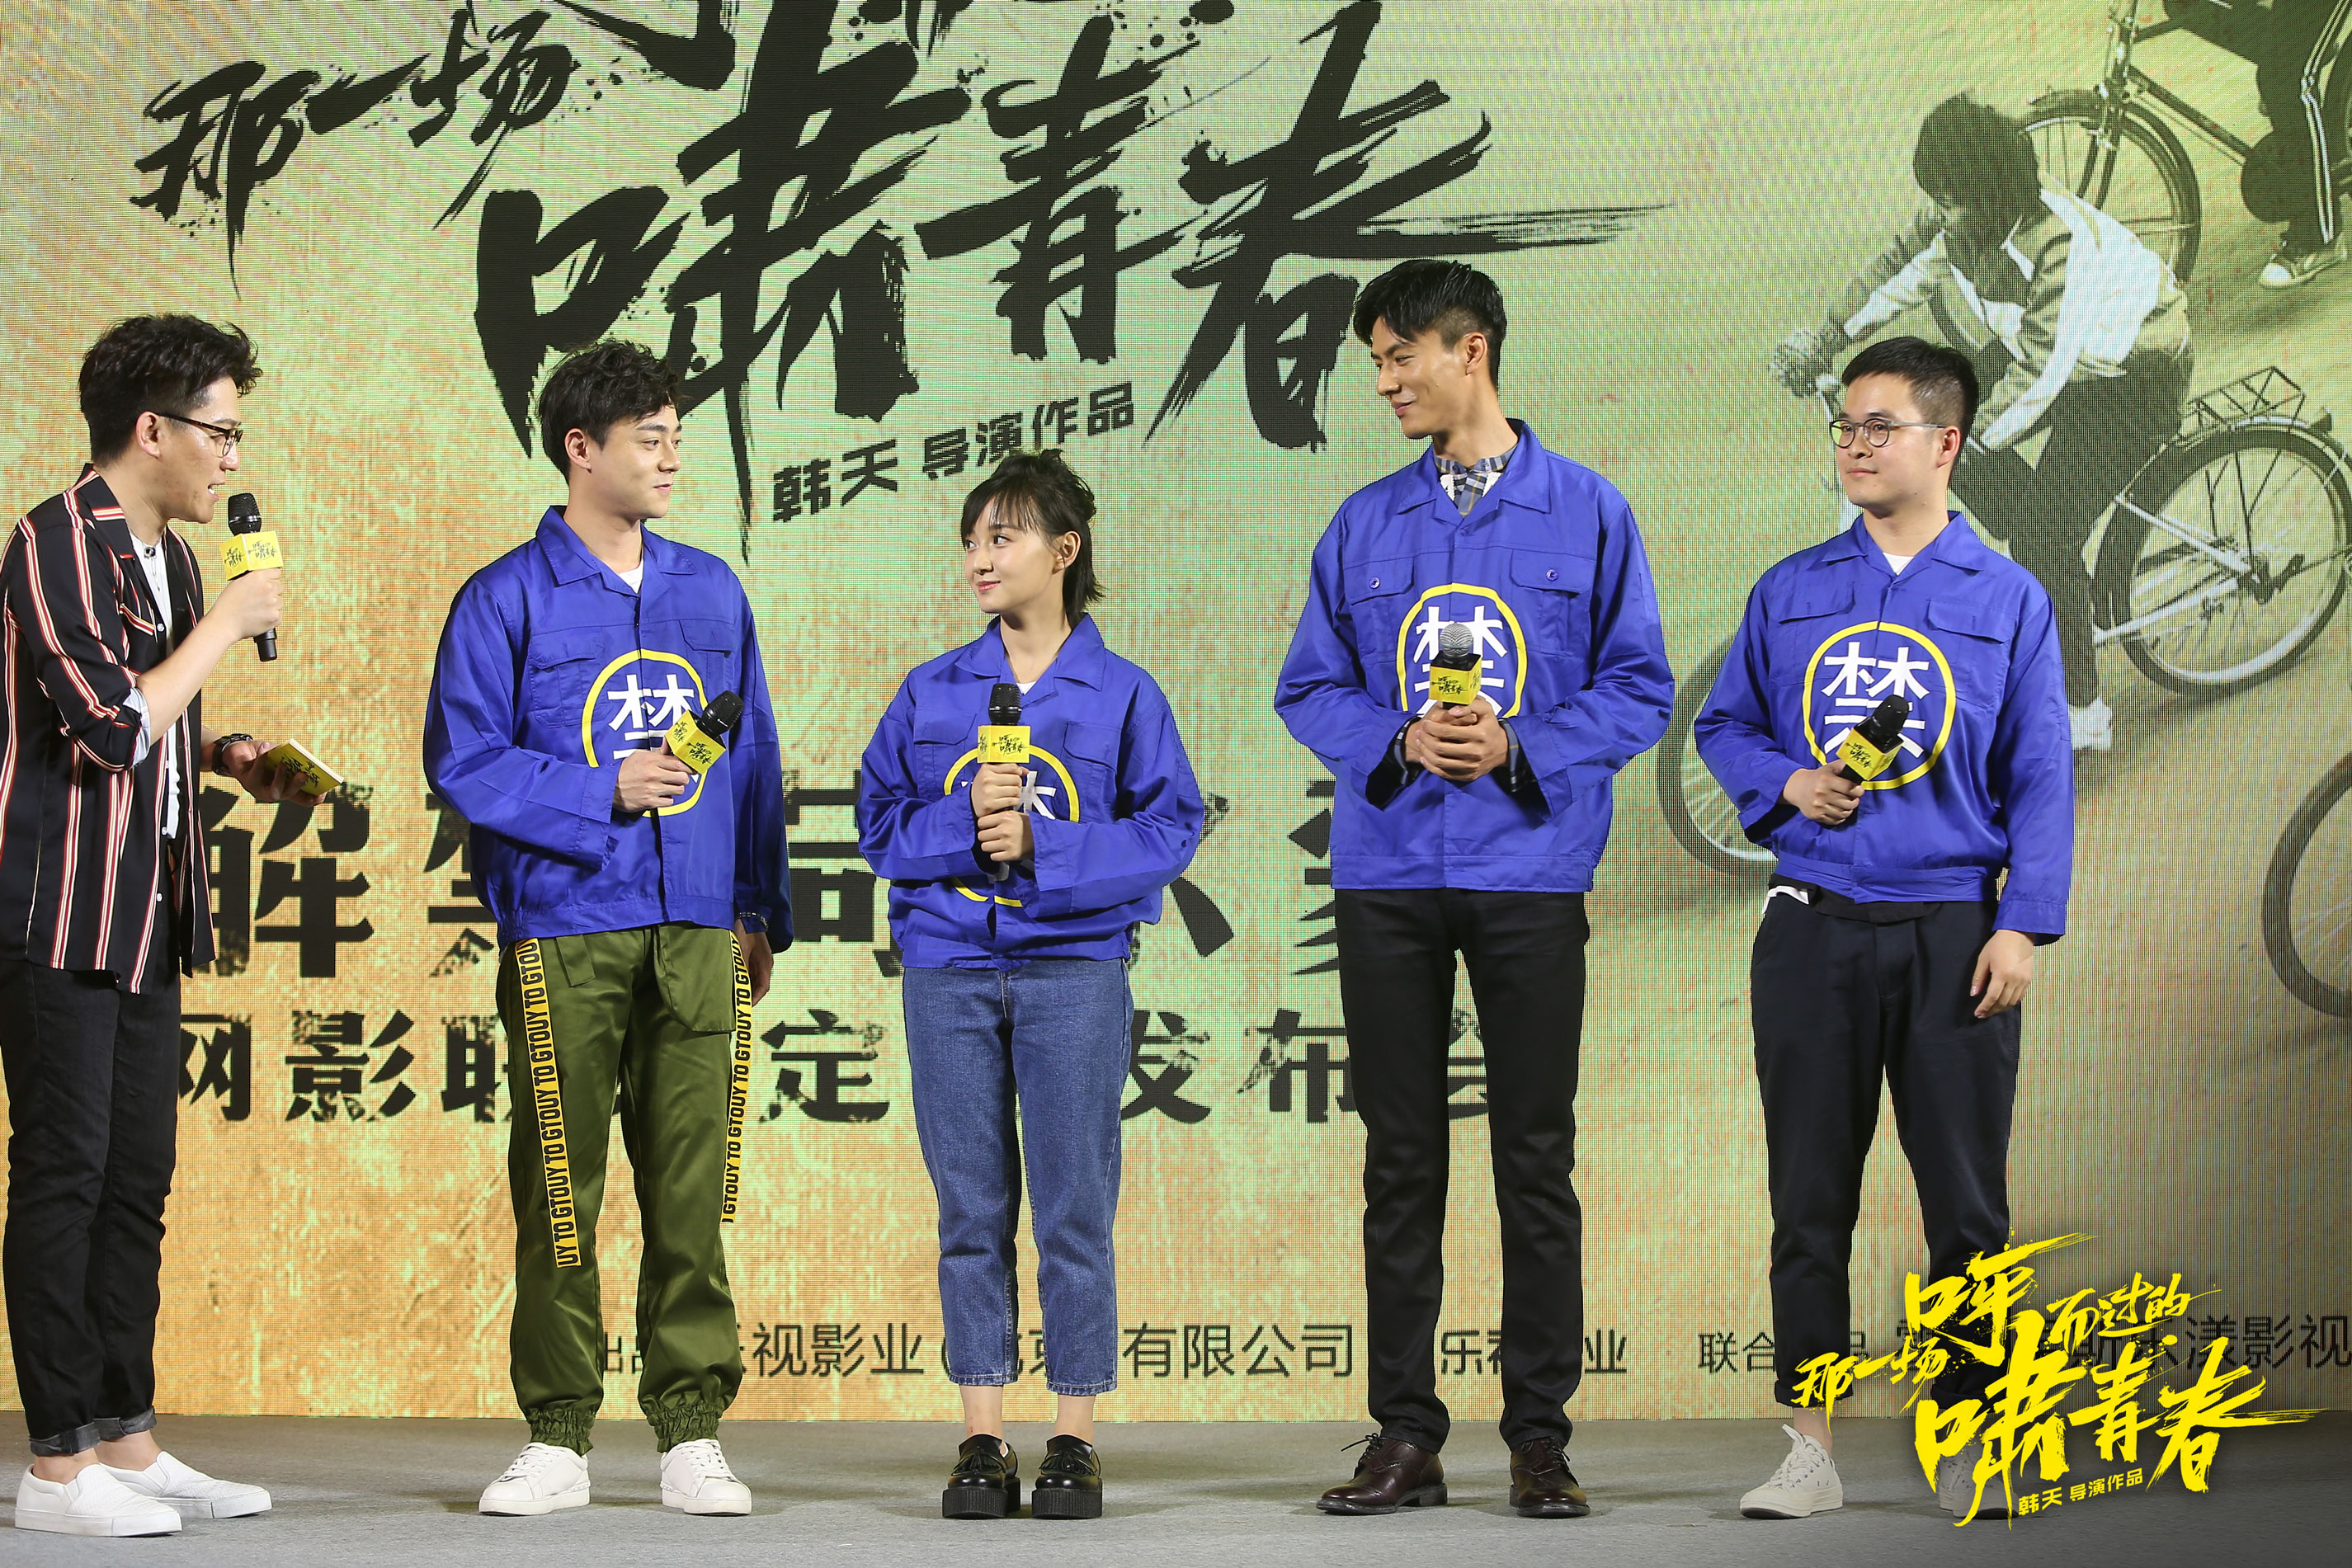 Director Han Tian (right) with leading members of the cast at a promotional event in Beijing for his latest movie The Past Roar Youth on Friday, June 9, 2017. [Photo provided to China Plus]